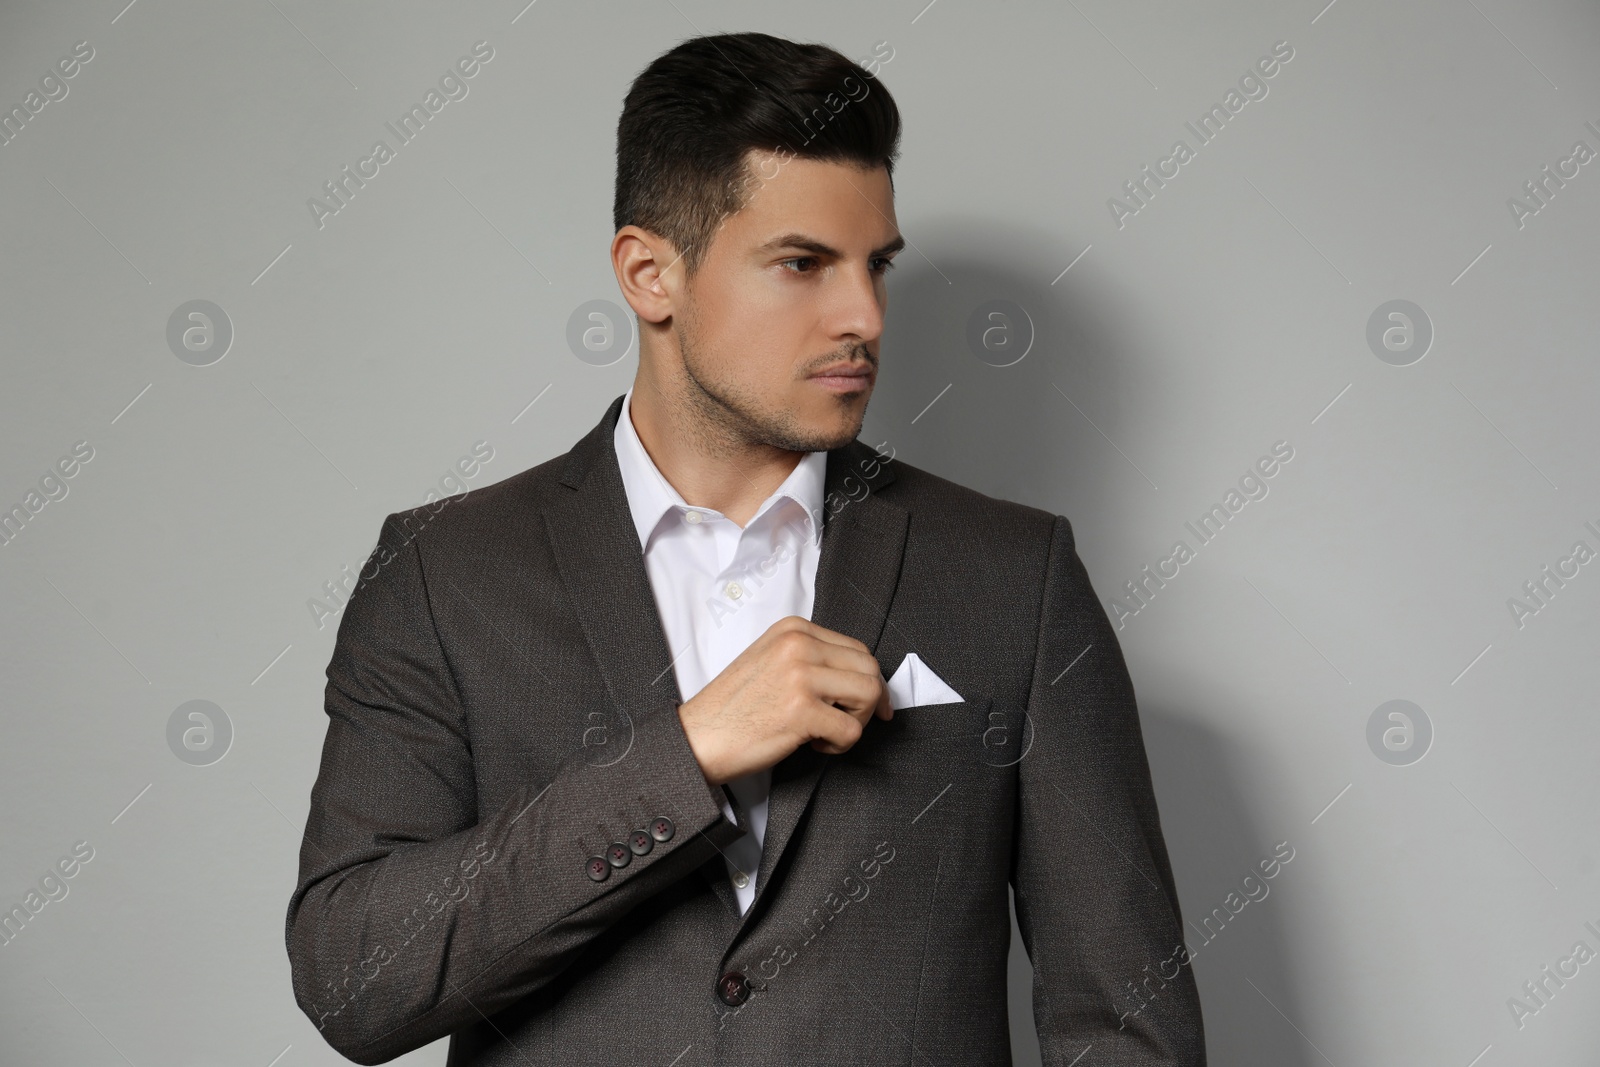 Photo of Man fixing handkerchief in breast pocket of his suit on light grey background